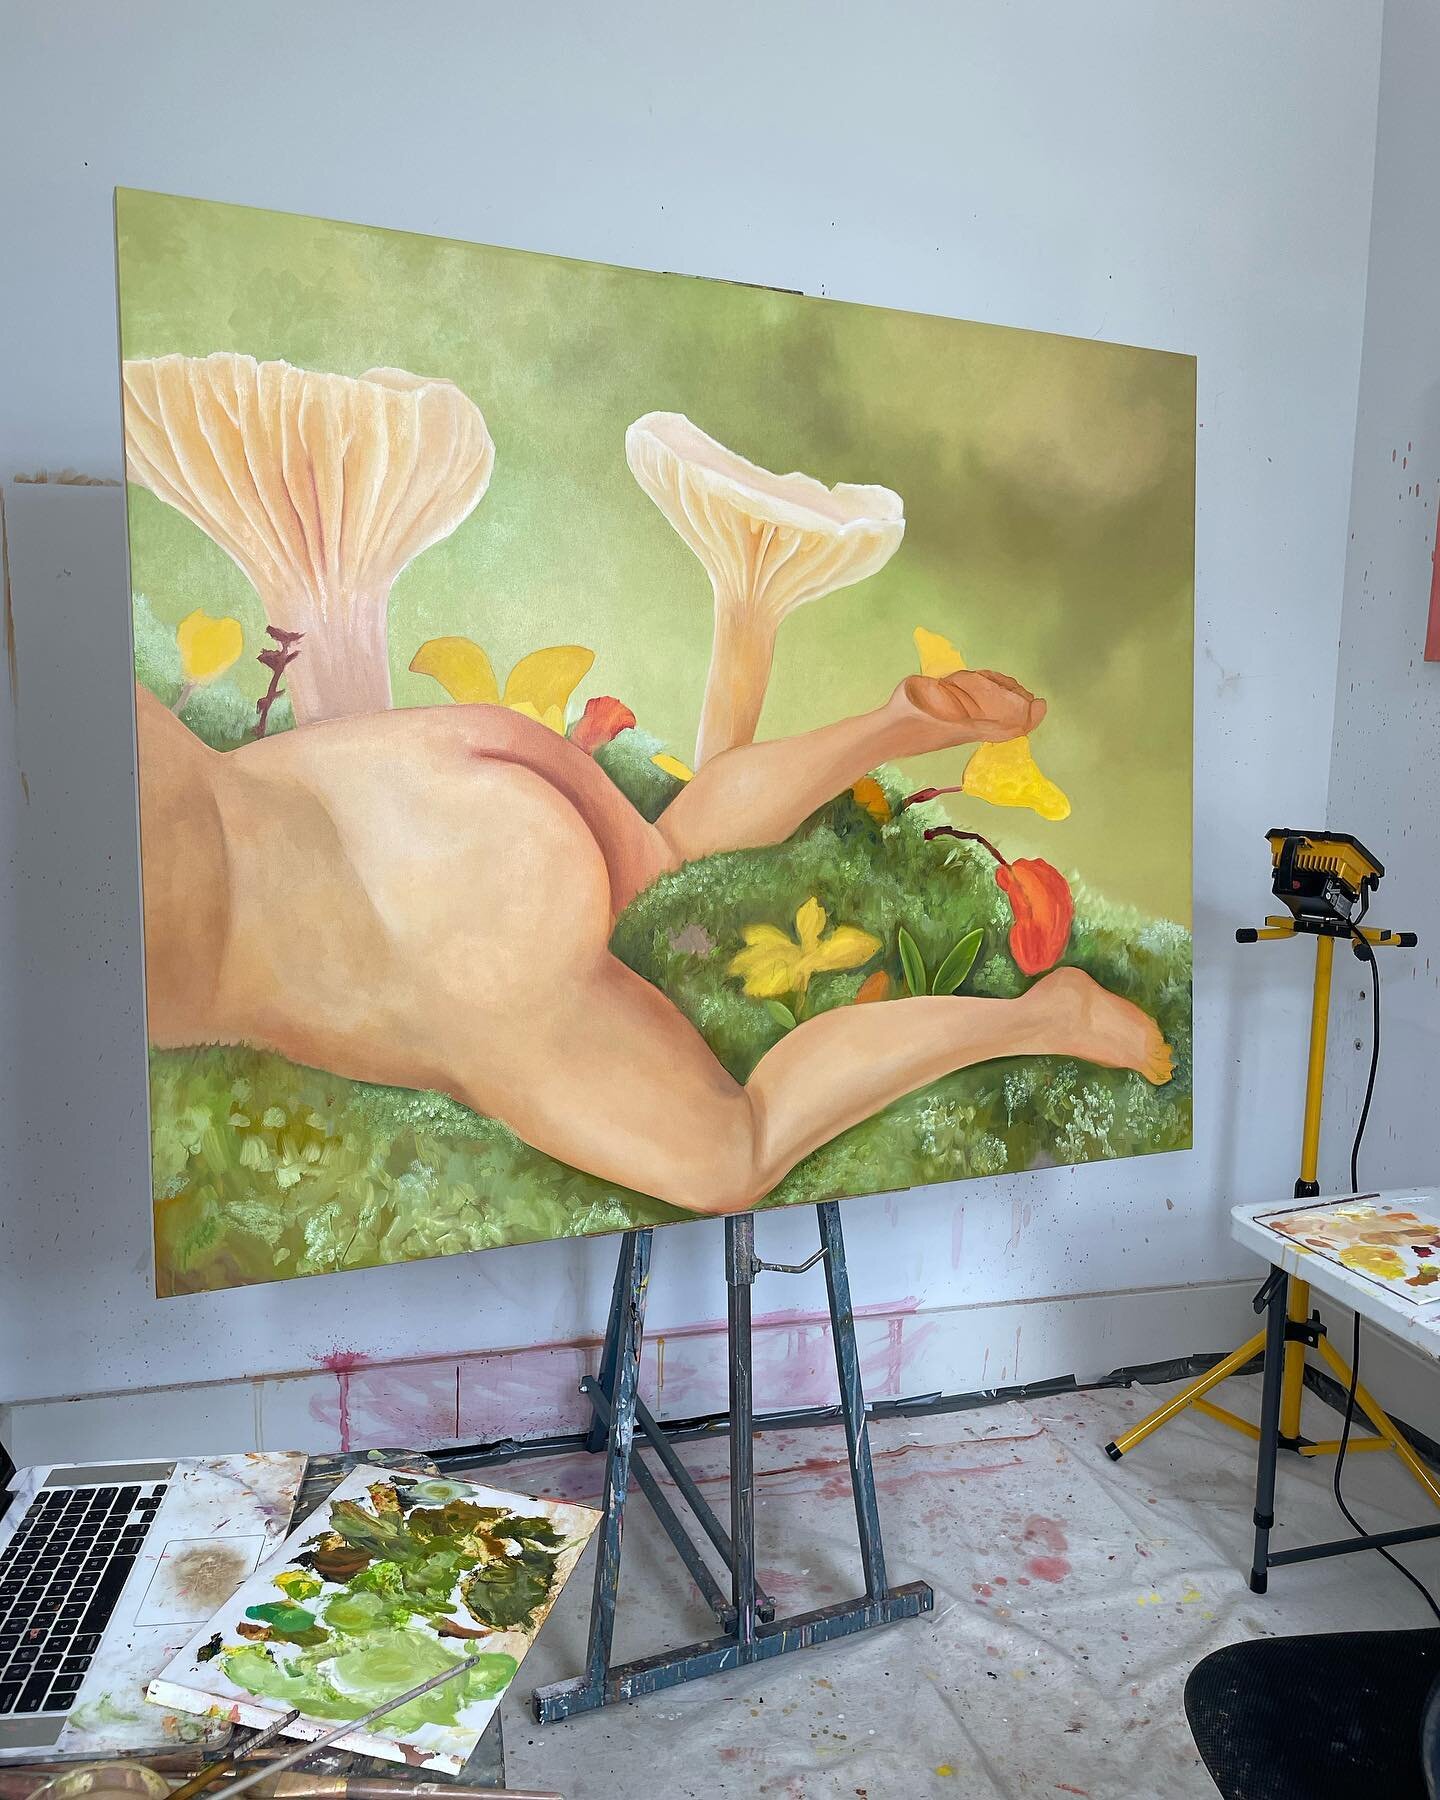 Reclining Nude in the Grass // on the easel 🌾
48x60&rdquo;
Oil on canvas 

&mdash; All inquires please DM me! 💛😌

#art #artist #paint #painting #oilpainting #contemporaryart #nyc #nycart #bk #bkart #female #womanartist  #women #femalepainter #colo